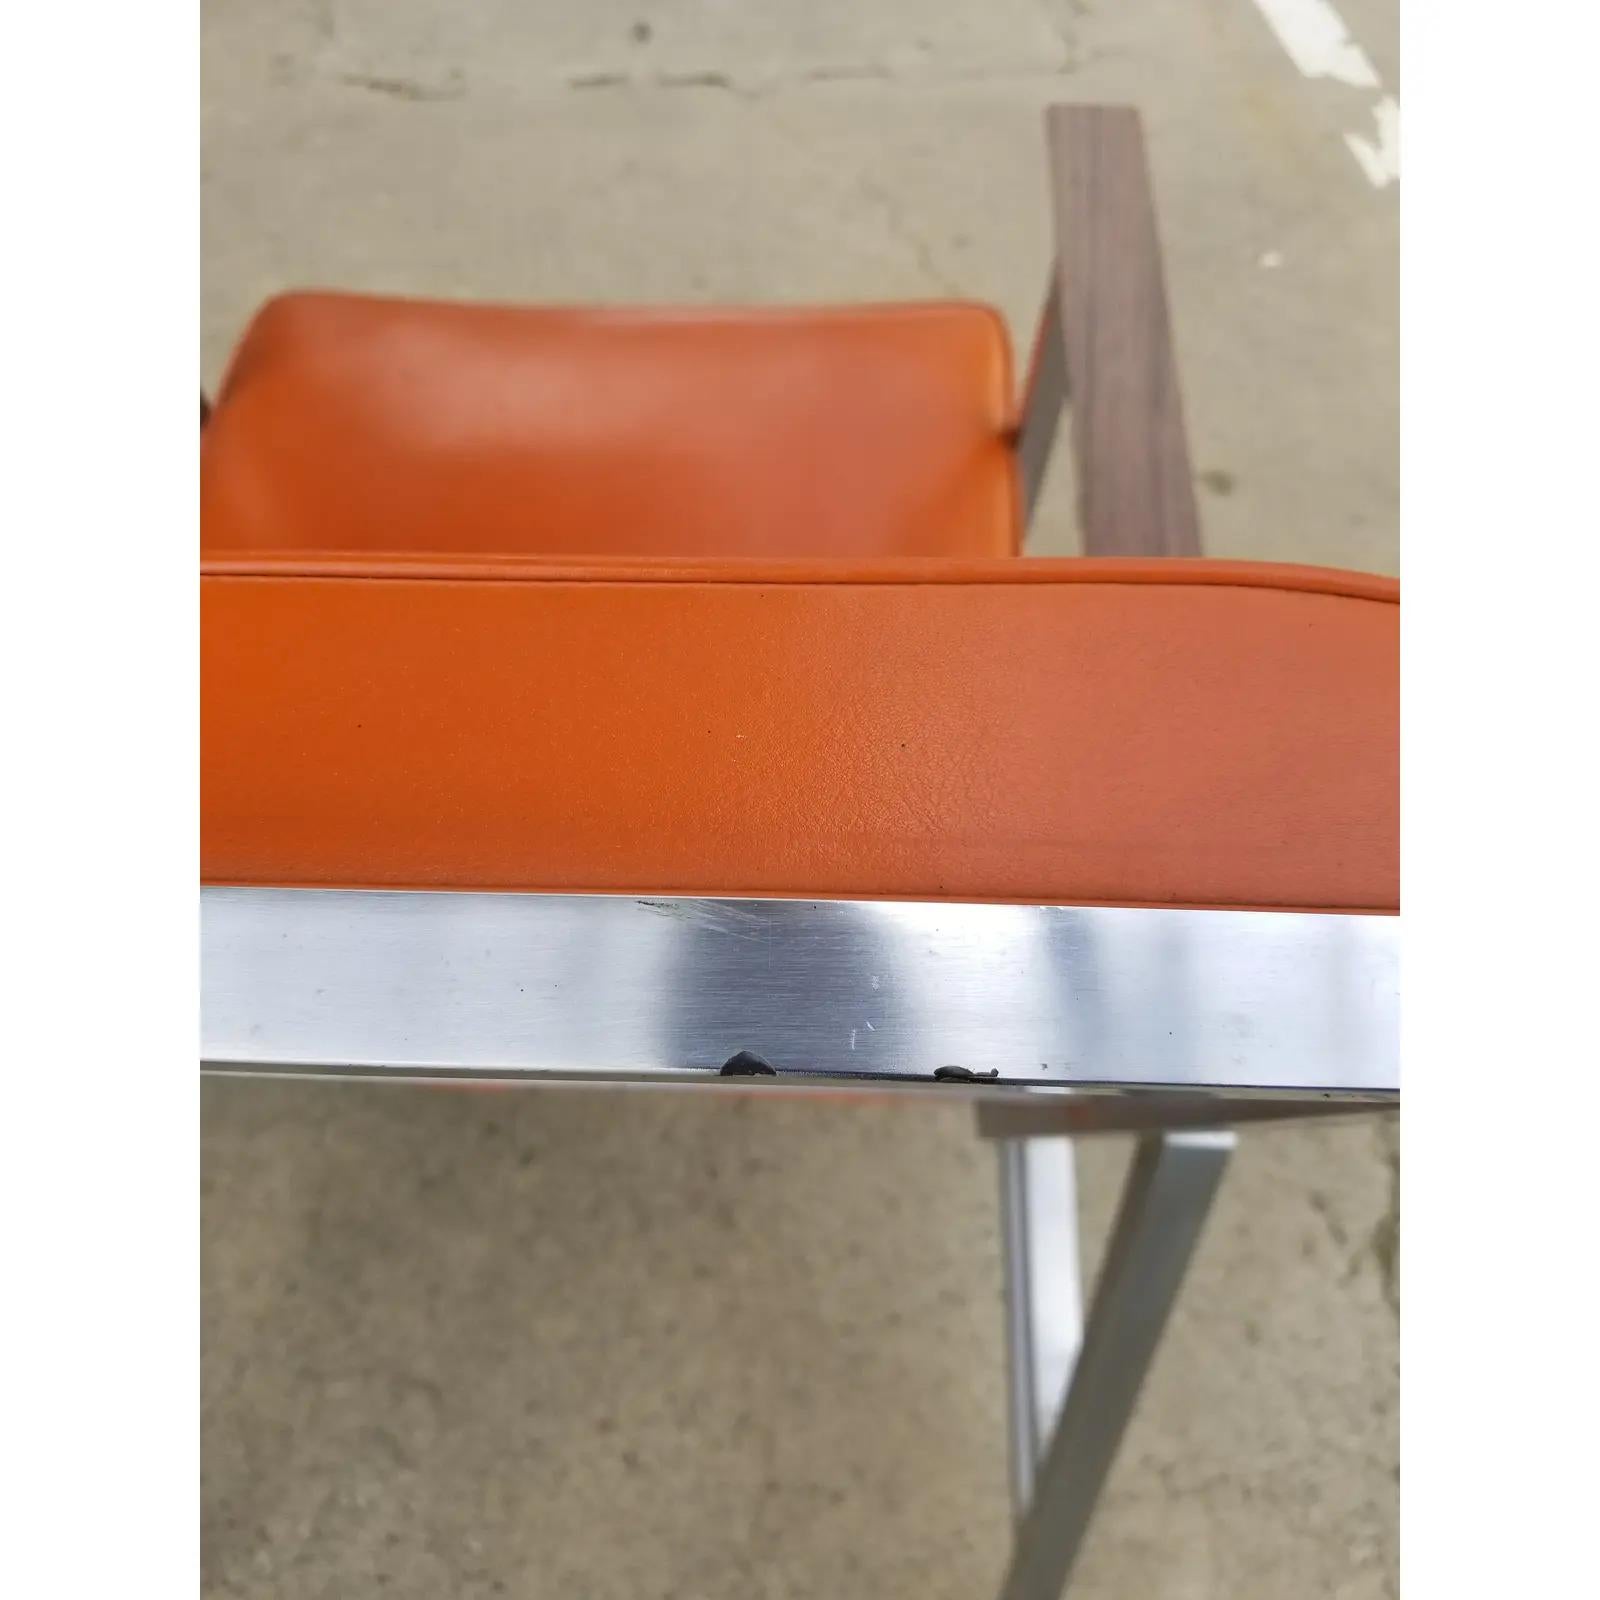 Steelcase Industrial or Office Chair 3